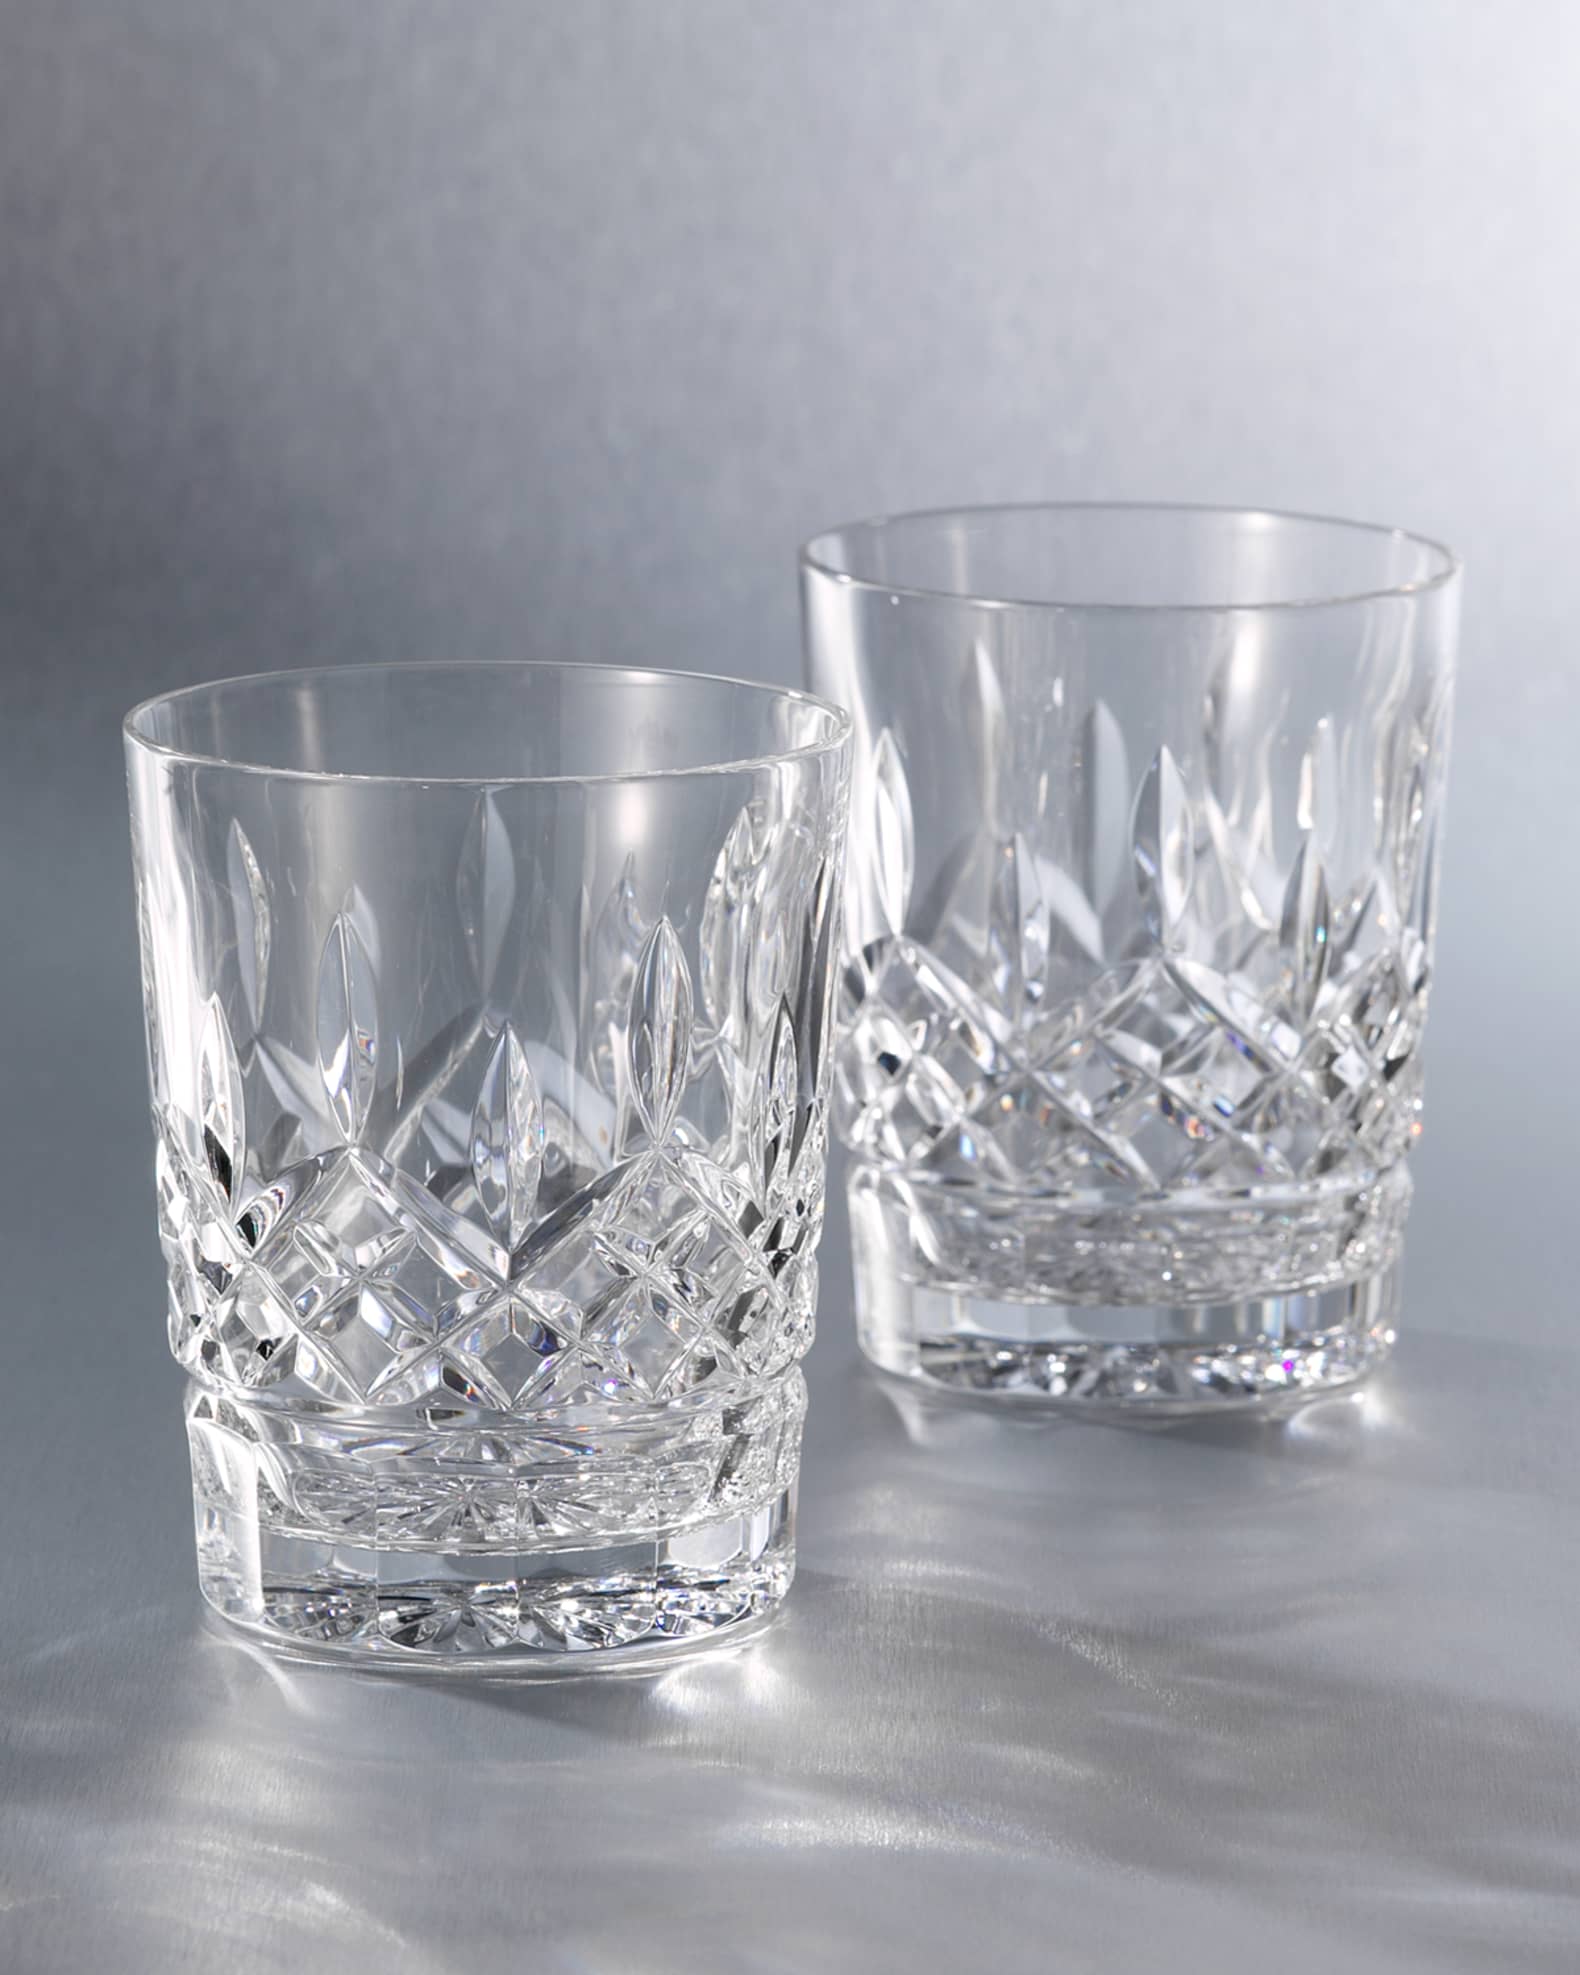  Waterford Lead Crystal Lismore Double Old Fashioned